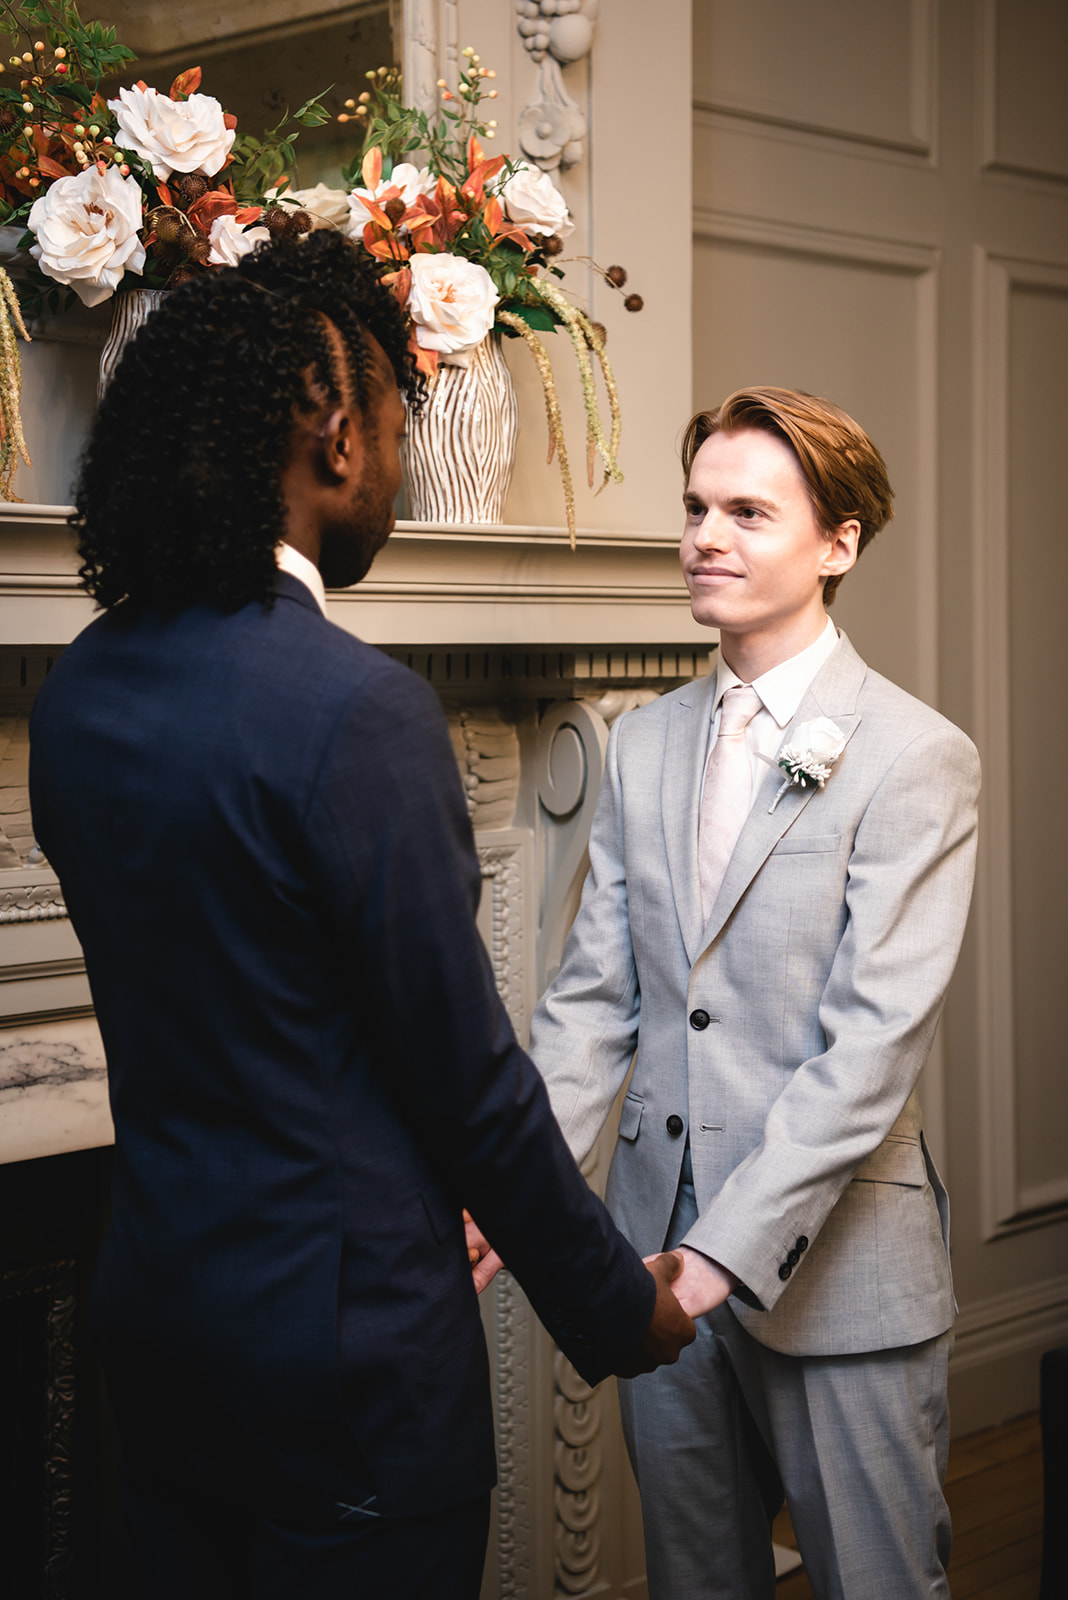 Benjamin and Ezekiel exchanging vows during the wedding ceremony in the Soho Room at Marylebone Town Hall